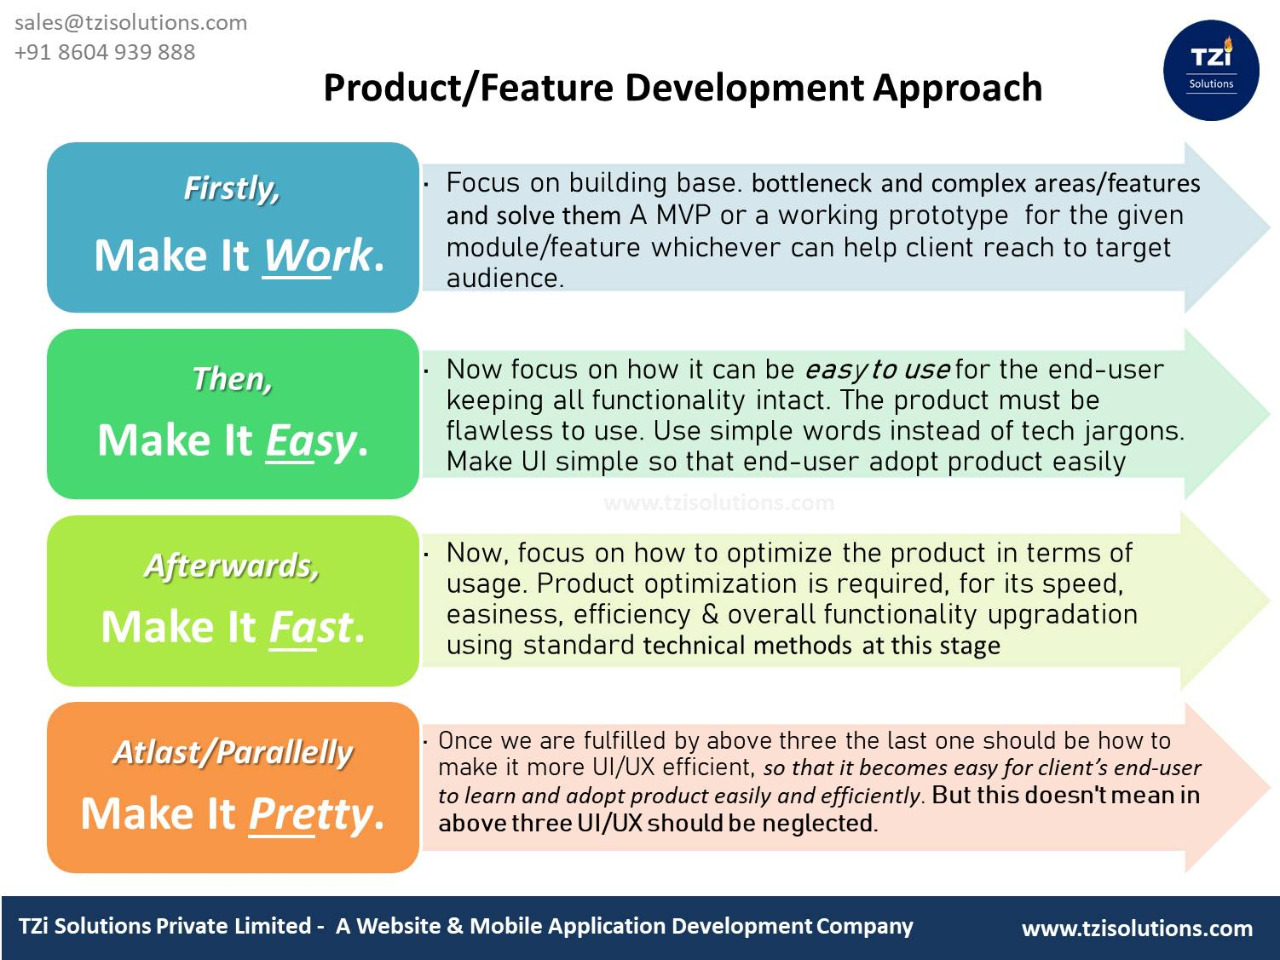 Product Development Approach and Strategy